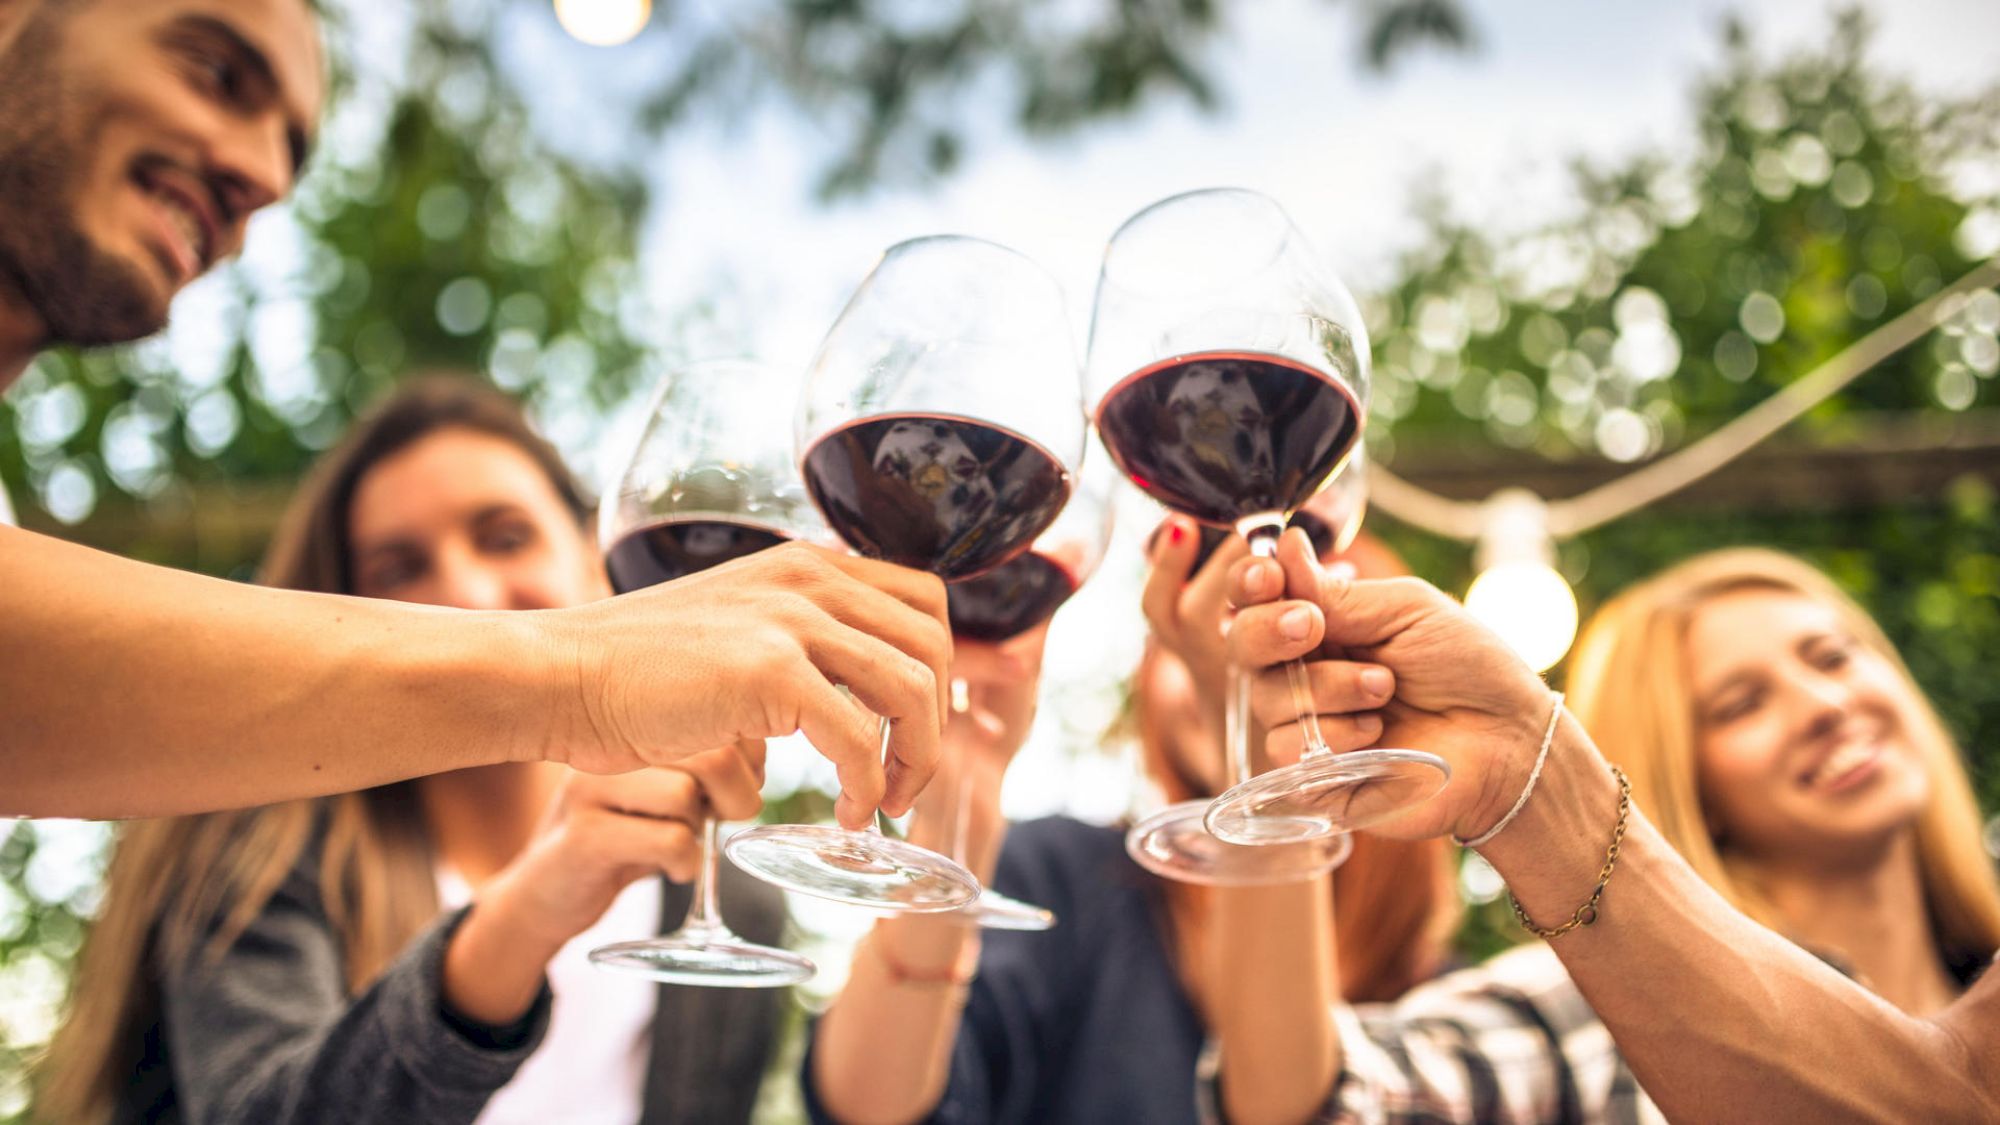 A group of people are outdoors, raising glasses of red wine in a toast, smiling and enjoying a festive atmosphere.